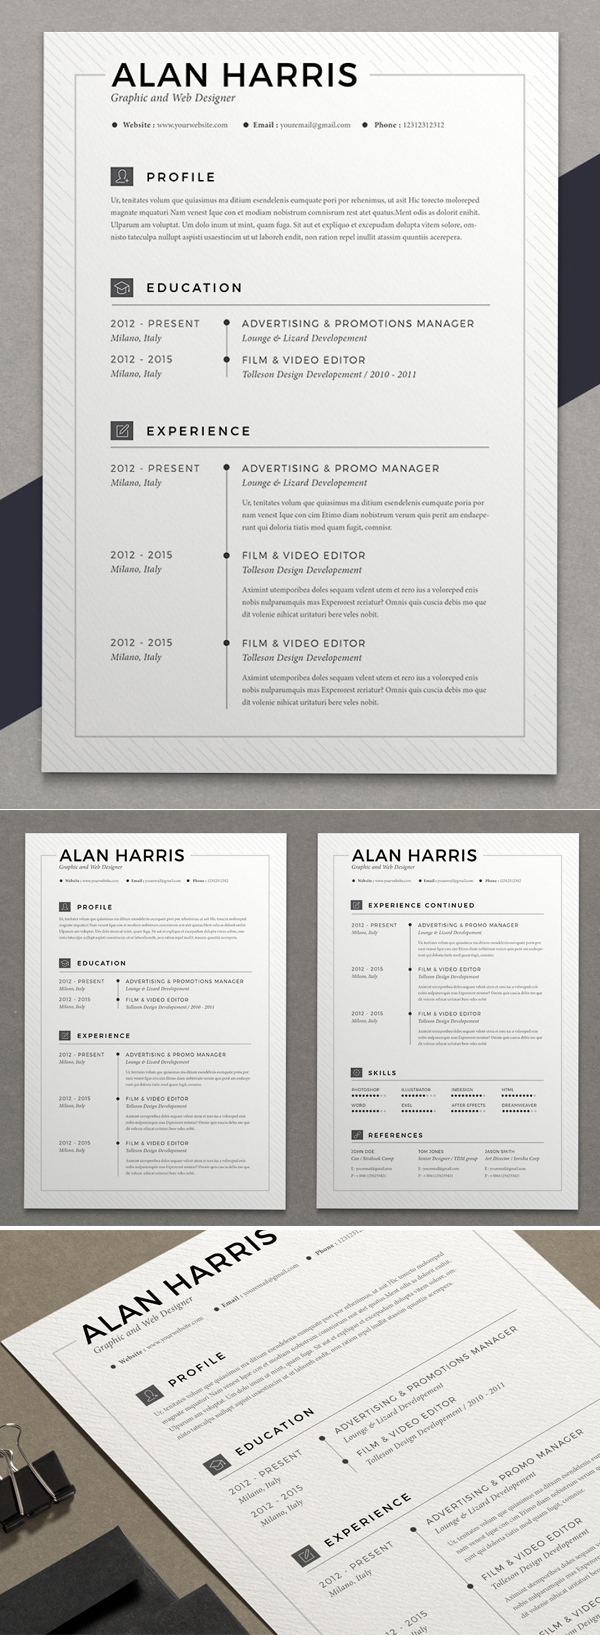 Resume Alan (2 pages)